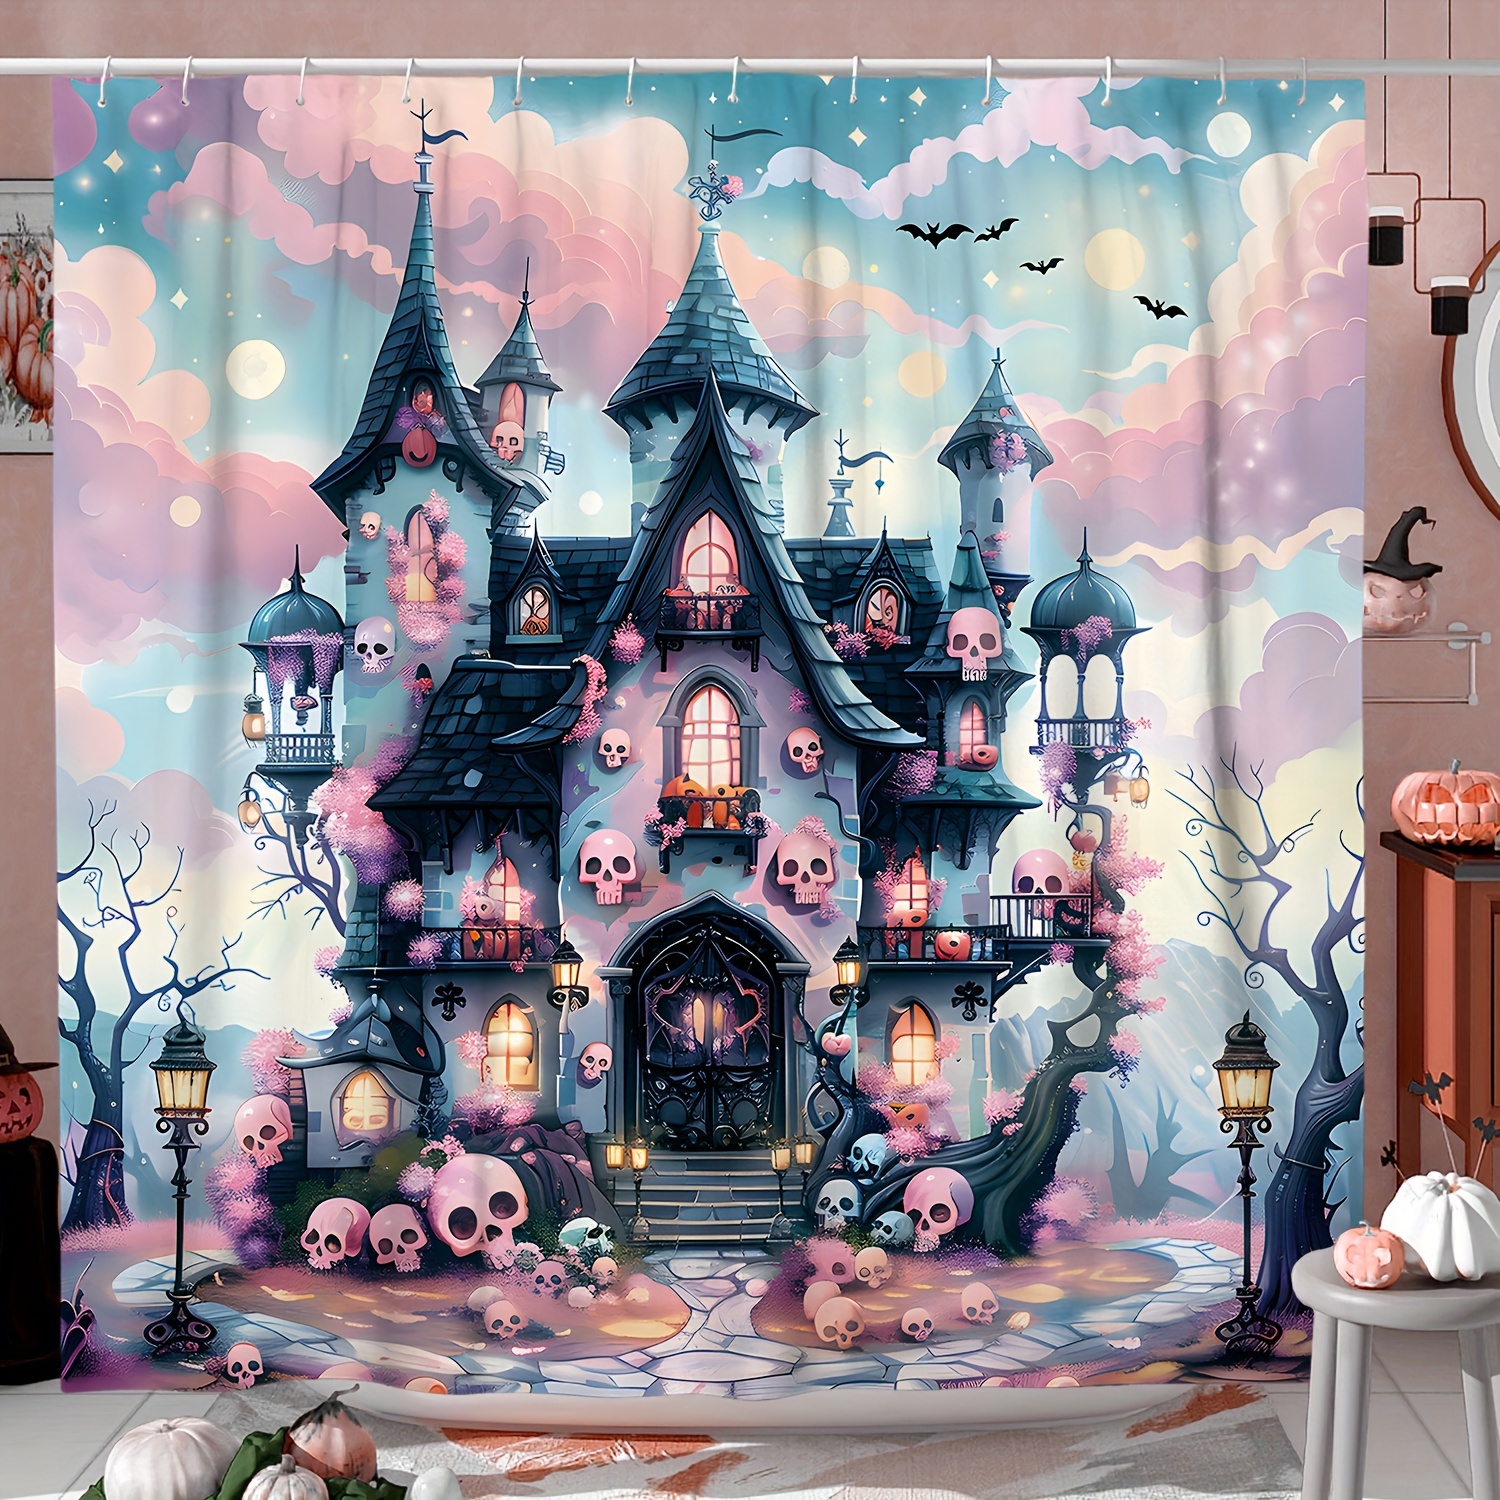 

-themed Shower Curtain - Waterproof Polyester, Spooky Castle & Design, 71x71 Inches With 12 Hooks, Machine Washable - Perfect For Bathtub Decor